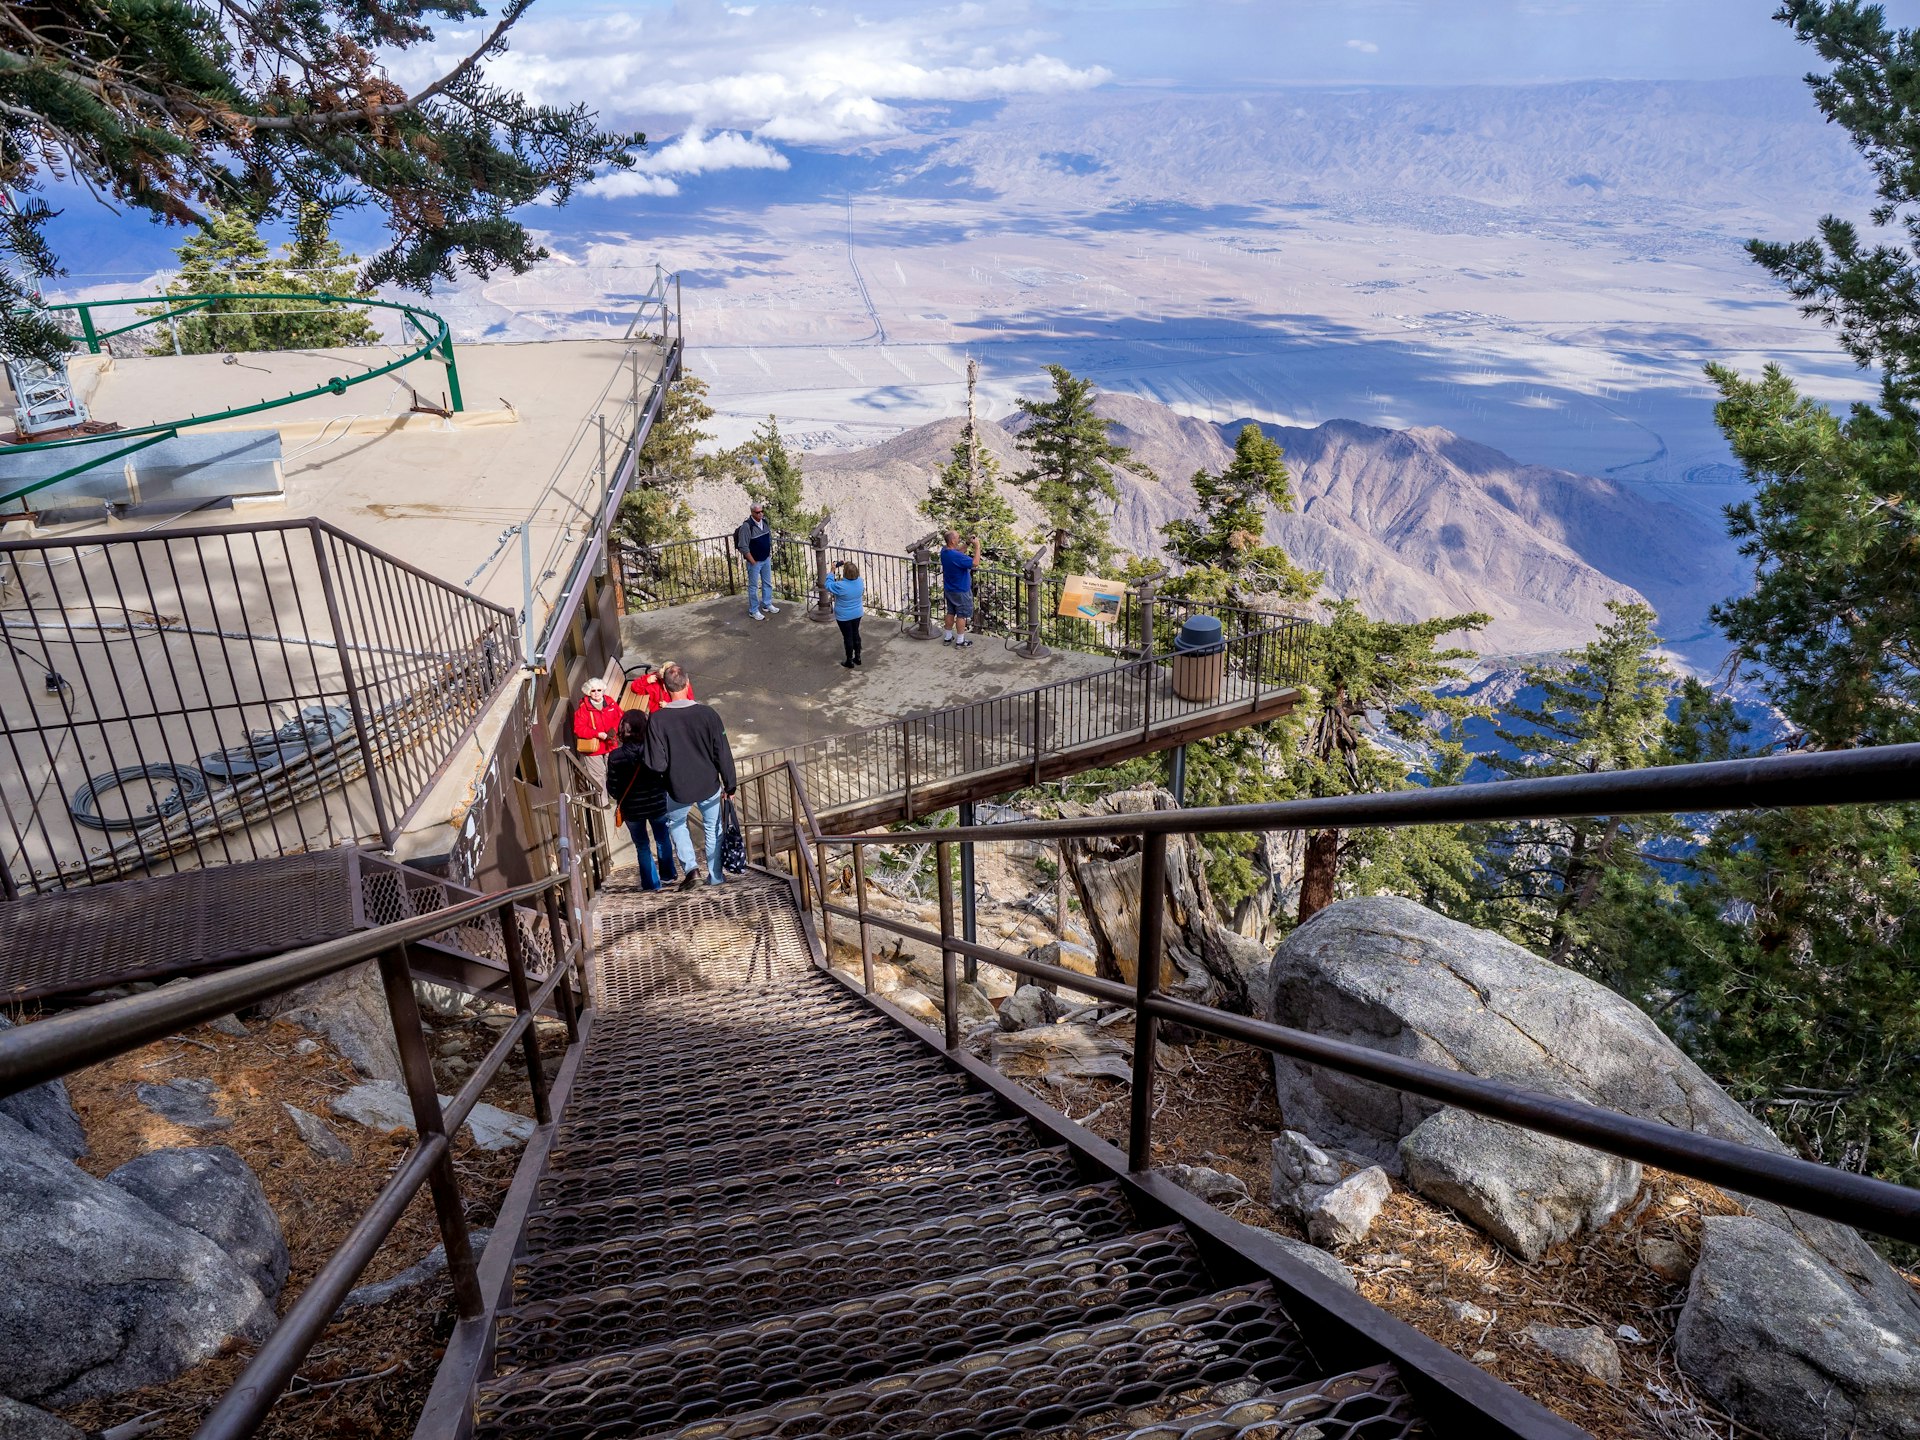 Tourists enjoying the view at the Palm Springs Aerial Tramway